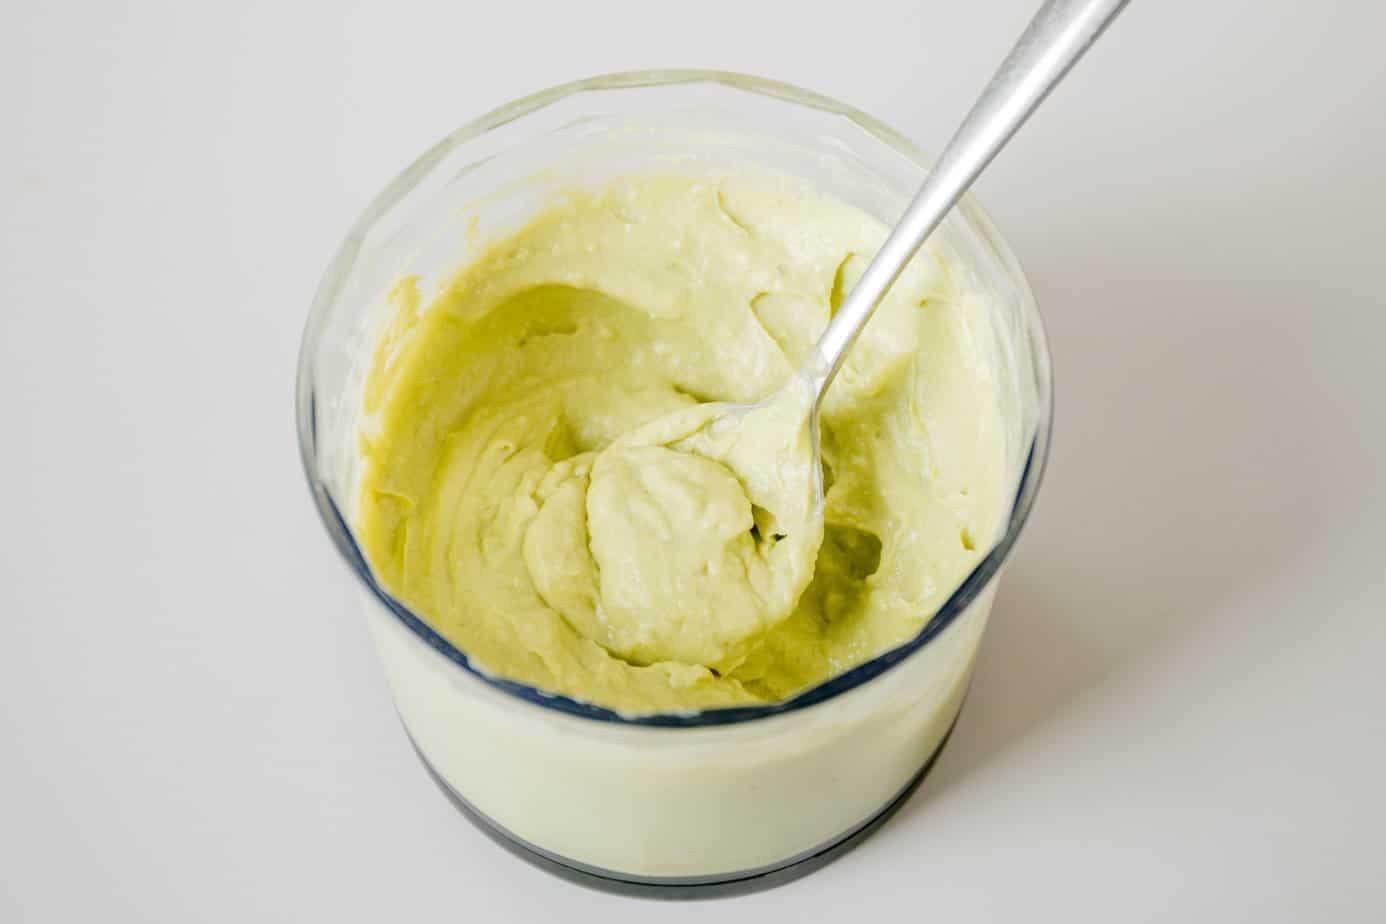 The blended avocado mixture with a spoon.